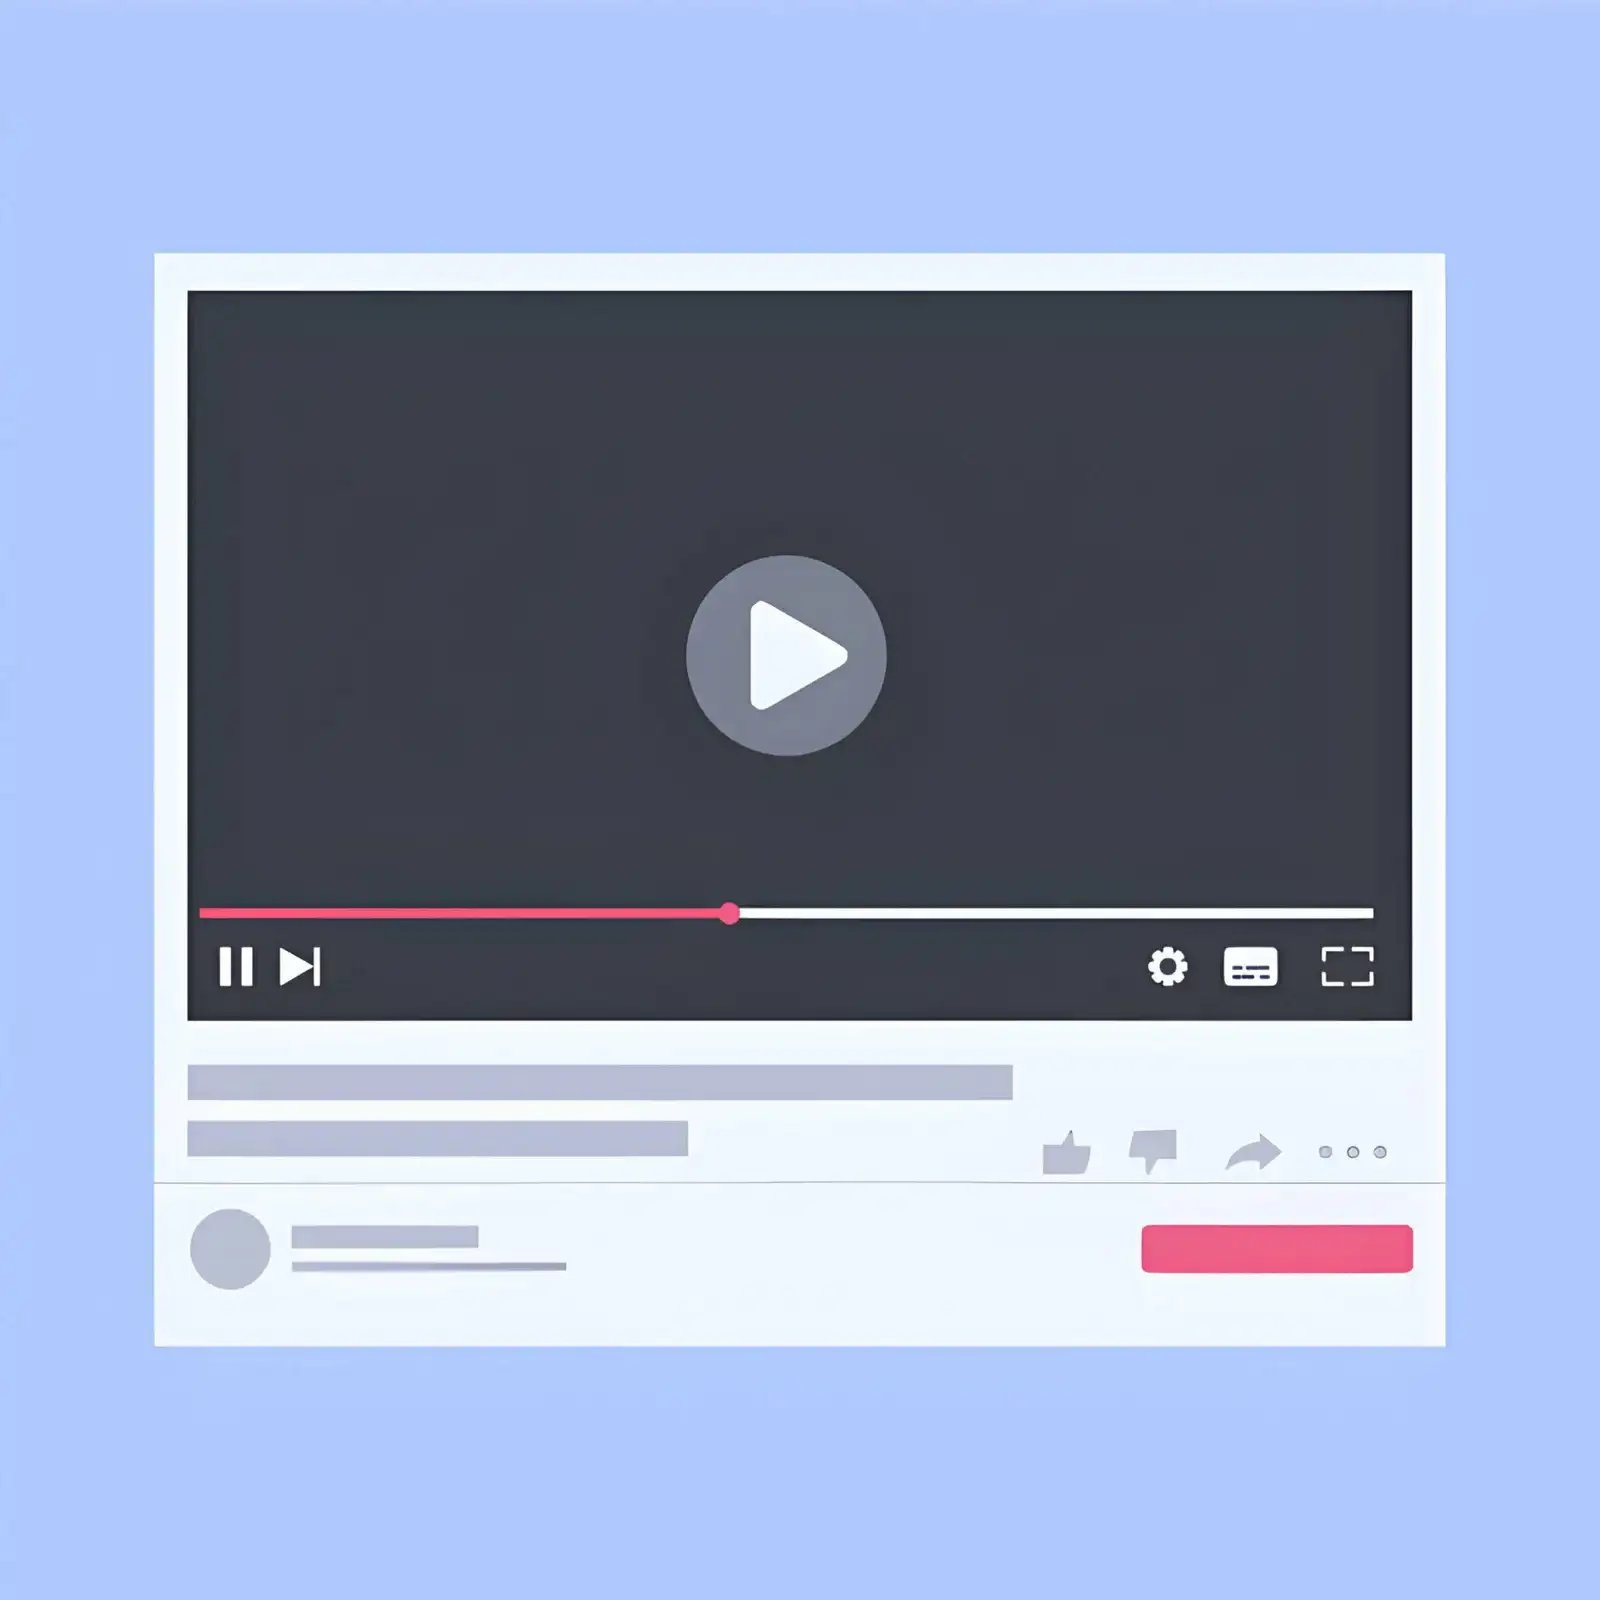 Illustration of a generic video player interface on a blue background.